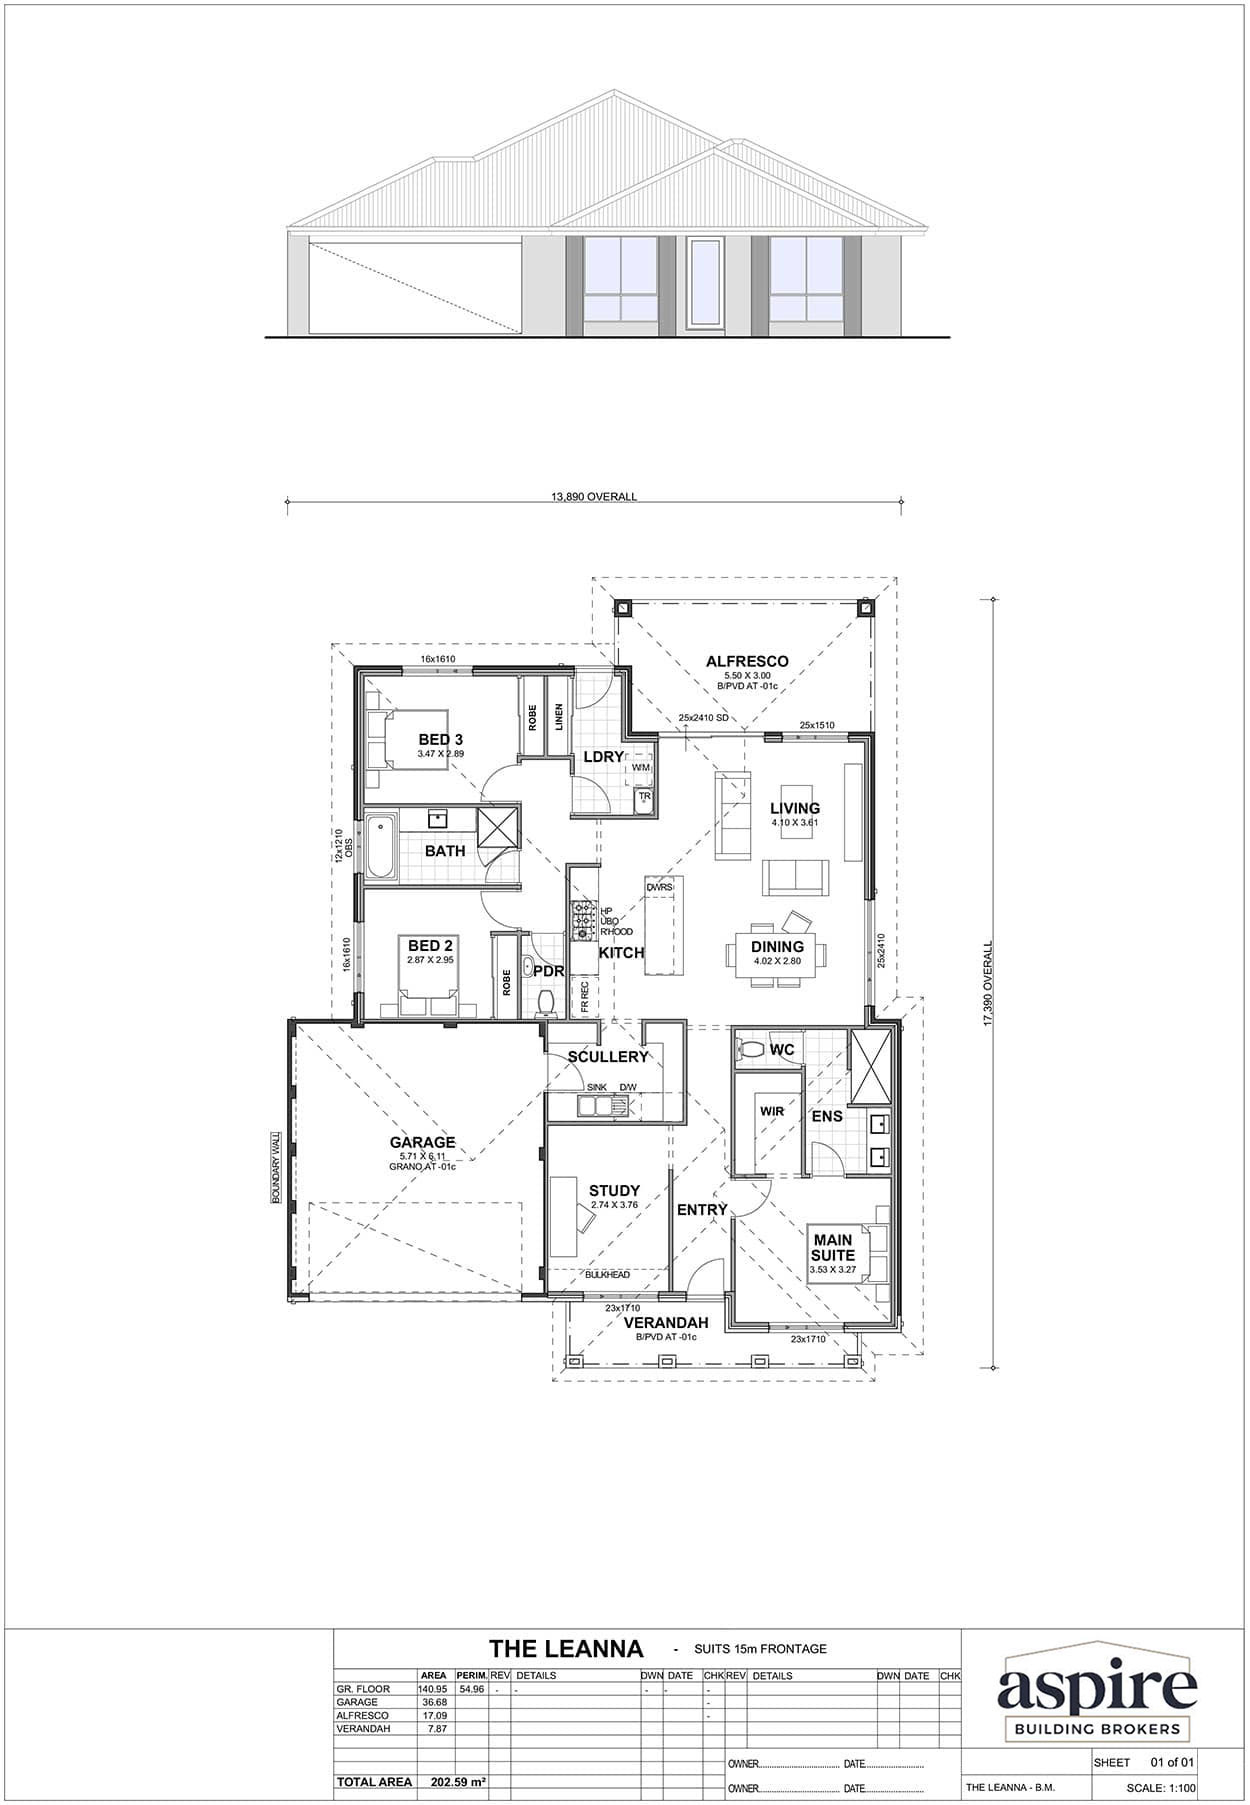 The Leanna Floor Plan - Perth New Build Home Designs. 3 Bedrooms and 15m Block Width. Aspire Building Brokers